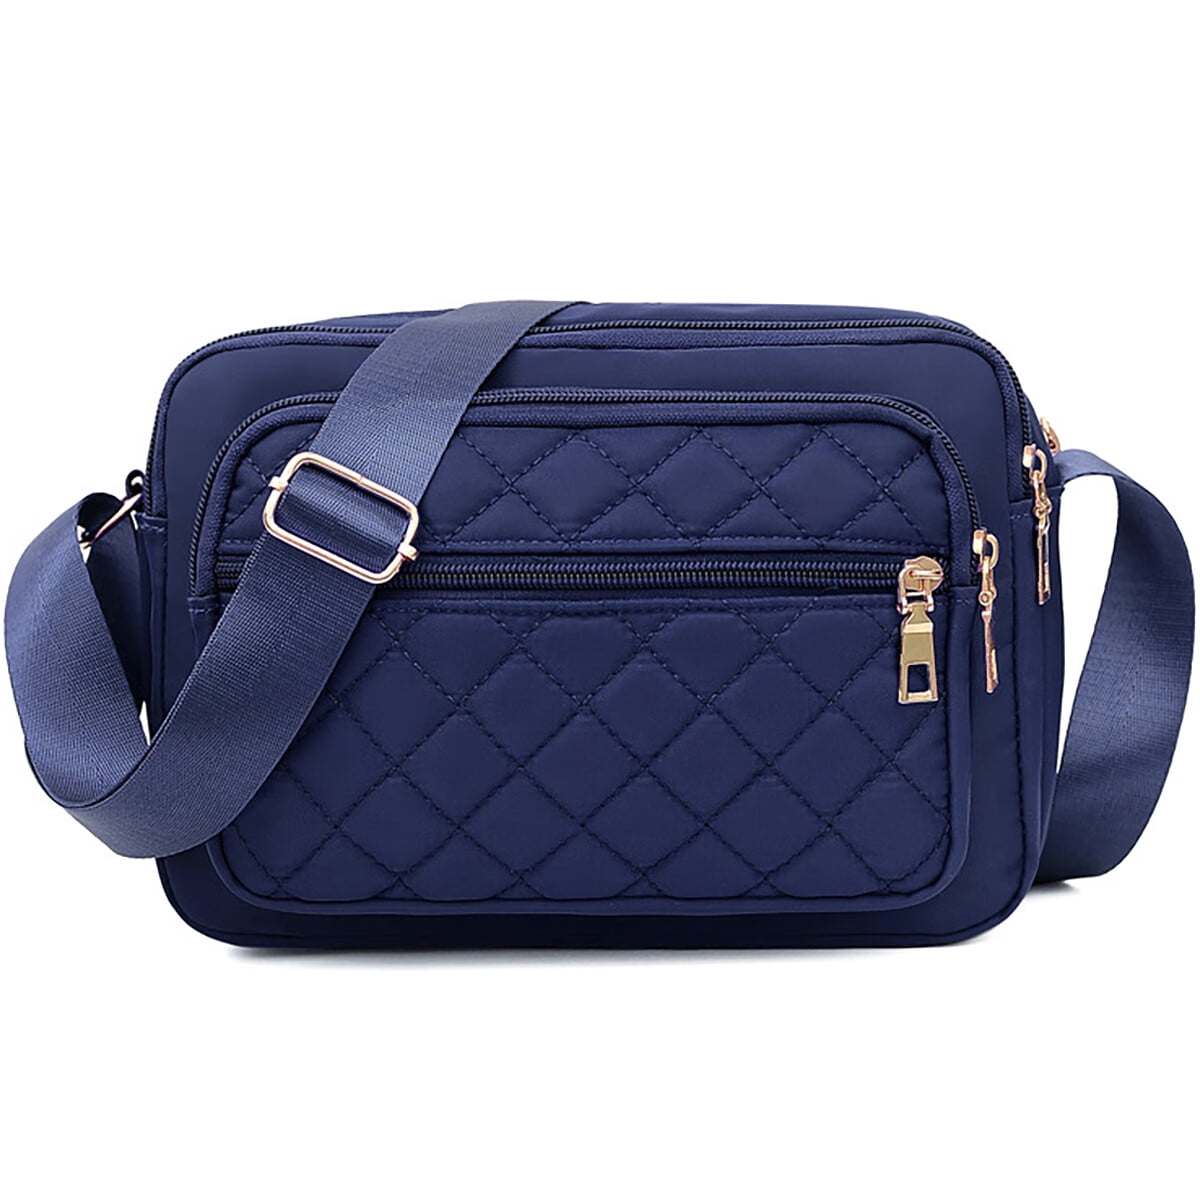 Tancuzo Crossbody Bags for Women Quilted Nylon Travel Shoulder Purse ...